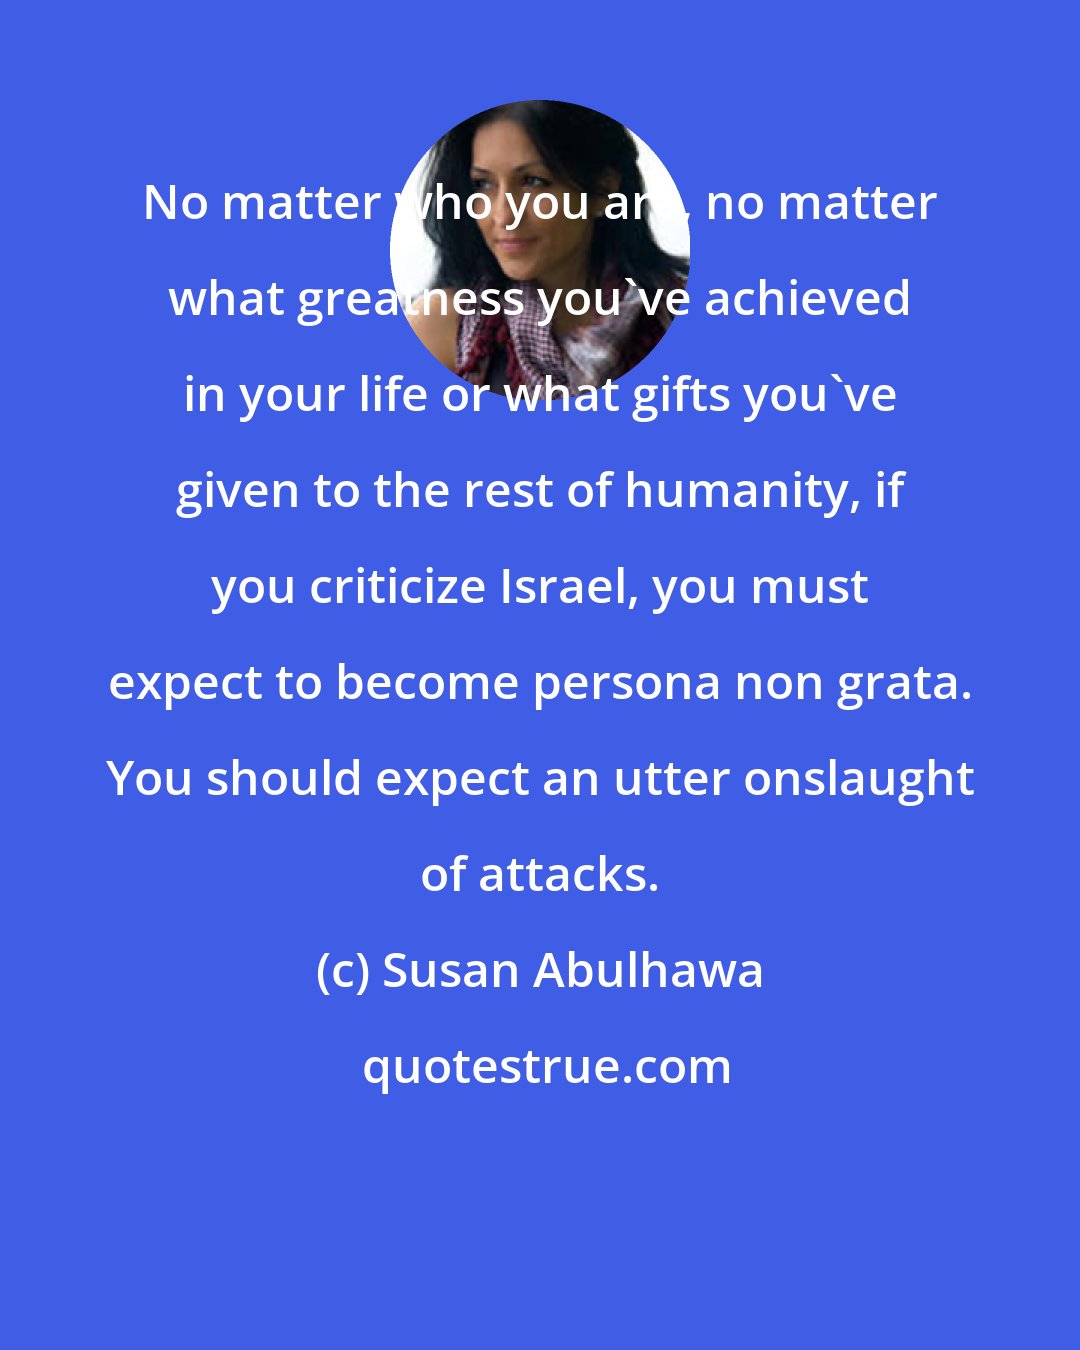 Susan Abulhawa: No matter who you are, no matter what greatness you've achieved in your life or what gifts you've given to the rest of humanity, if you criticize Israel, you must expect to become persona non grata. You should expect an utter onslaught of attacks.